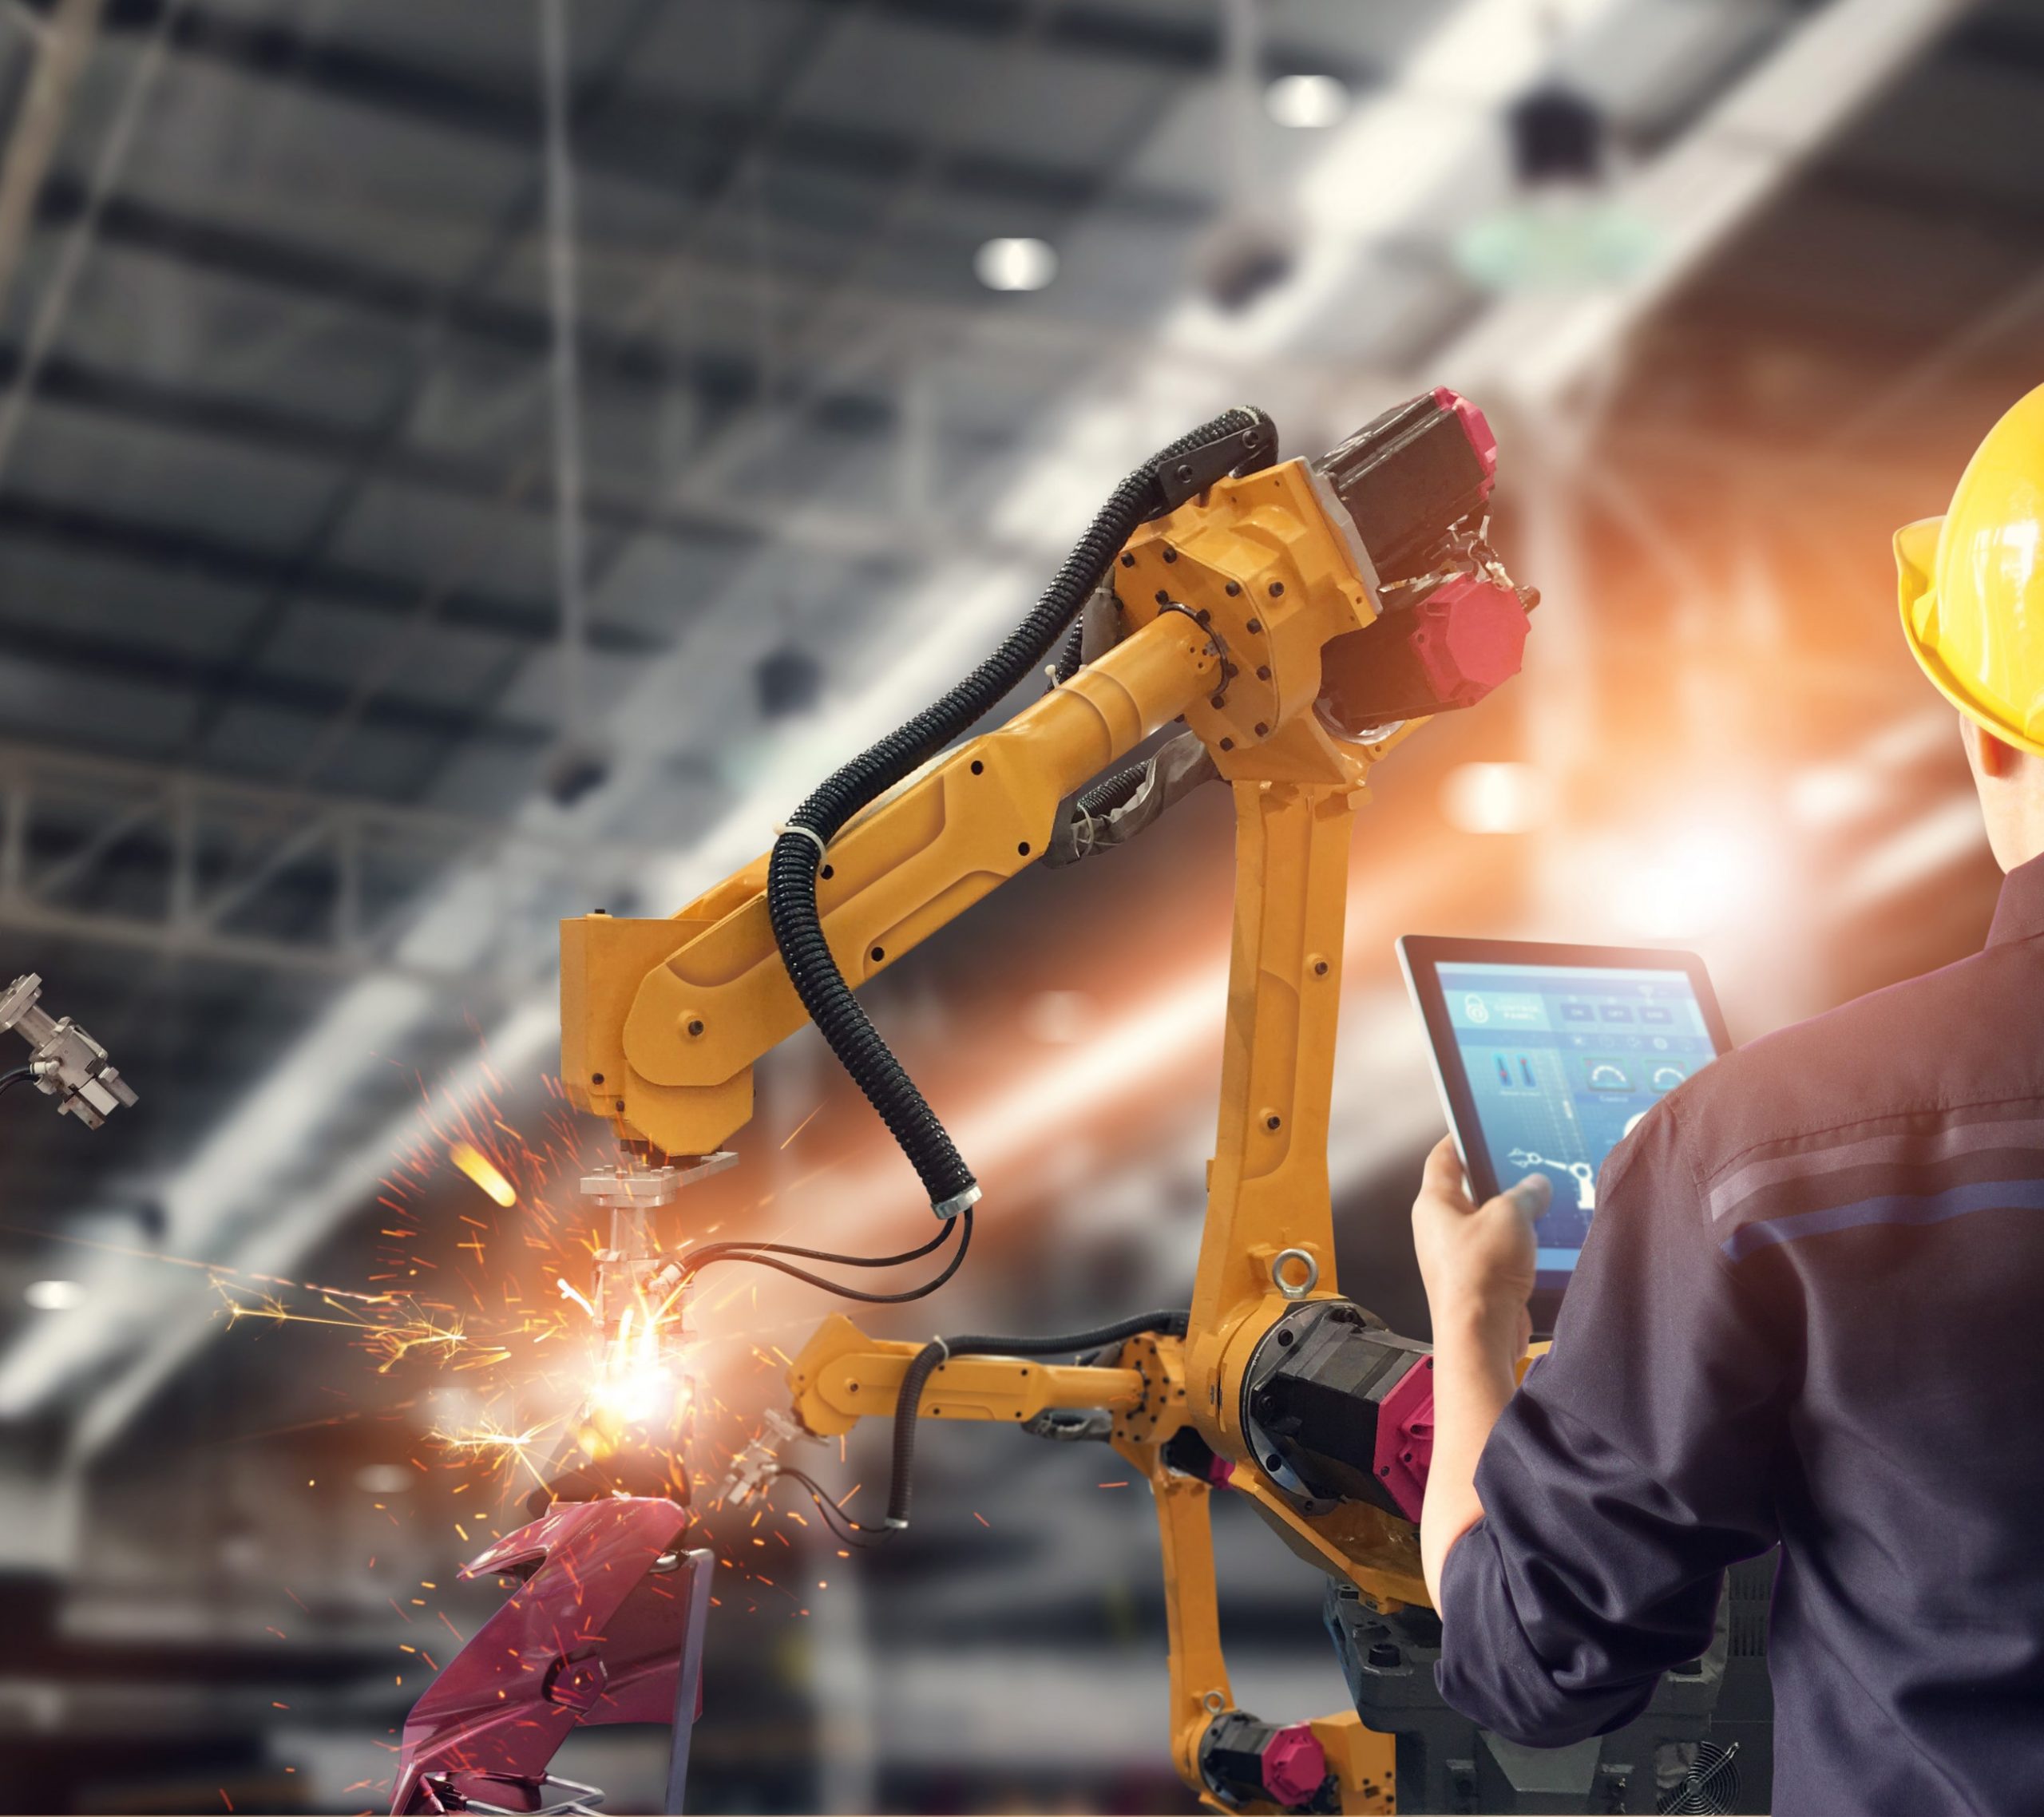 Robot monitoré par un ingénieur via une tablette. AdobeStock - Ipopbaand control automation robot arms machine in intelligent factory industrial on monitoring system software. Welding robotics and digital manufacturing operation.